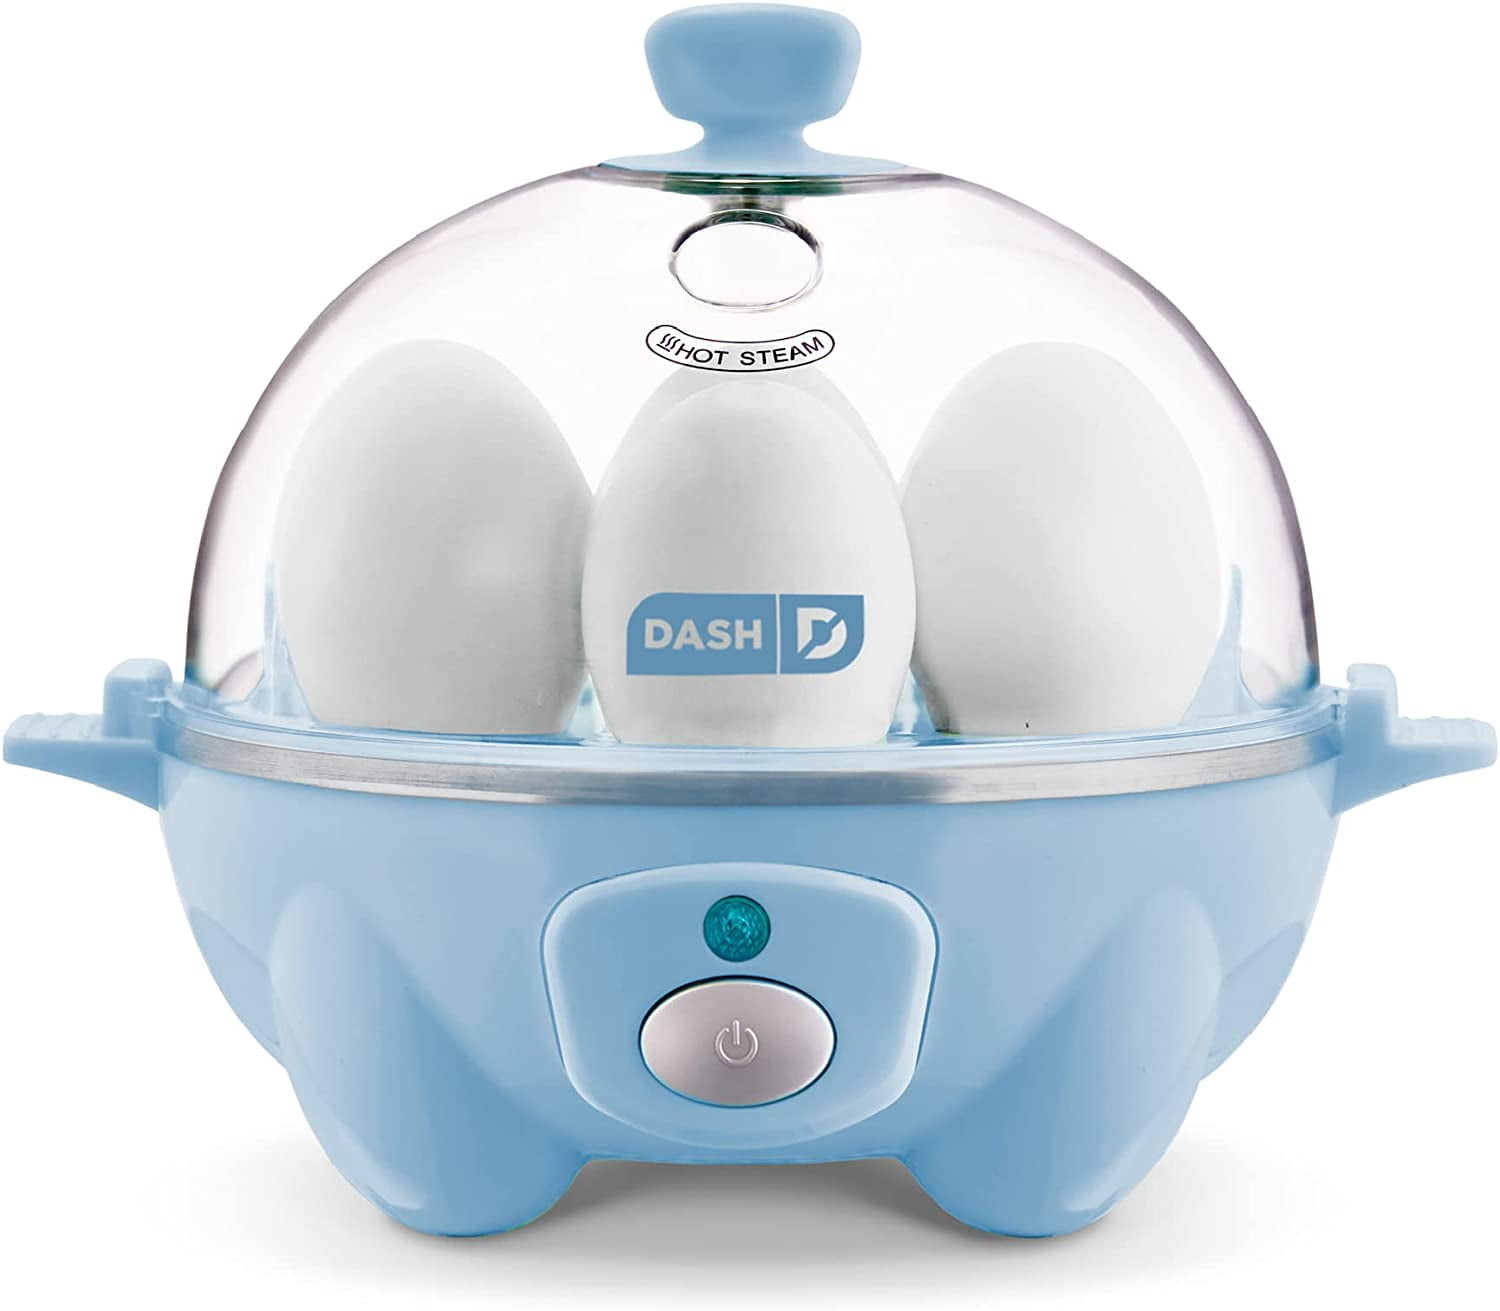 The Dash Rapid Egg Cooker Is $20 at